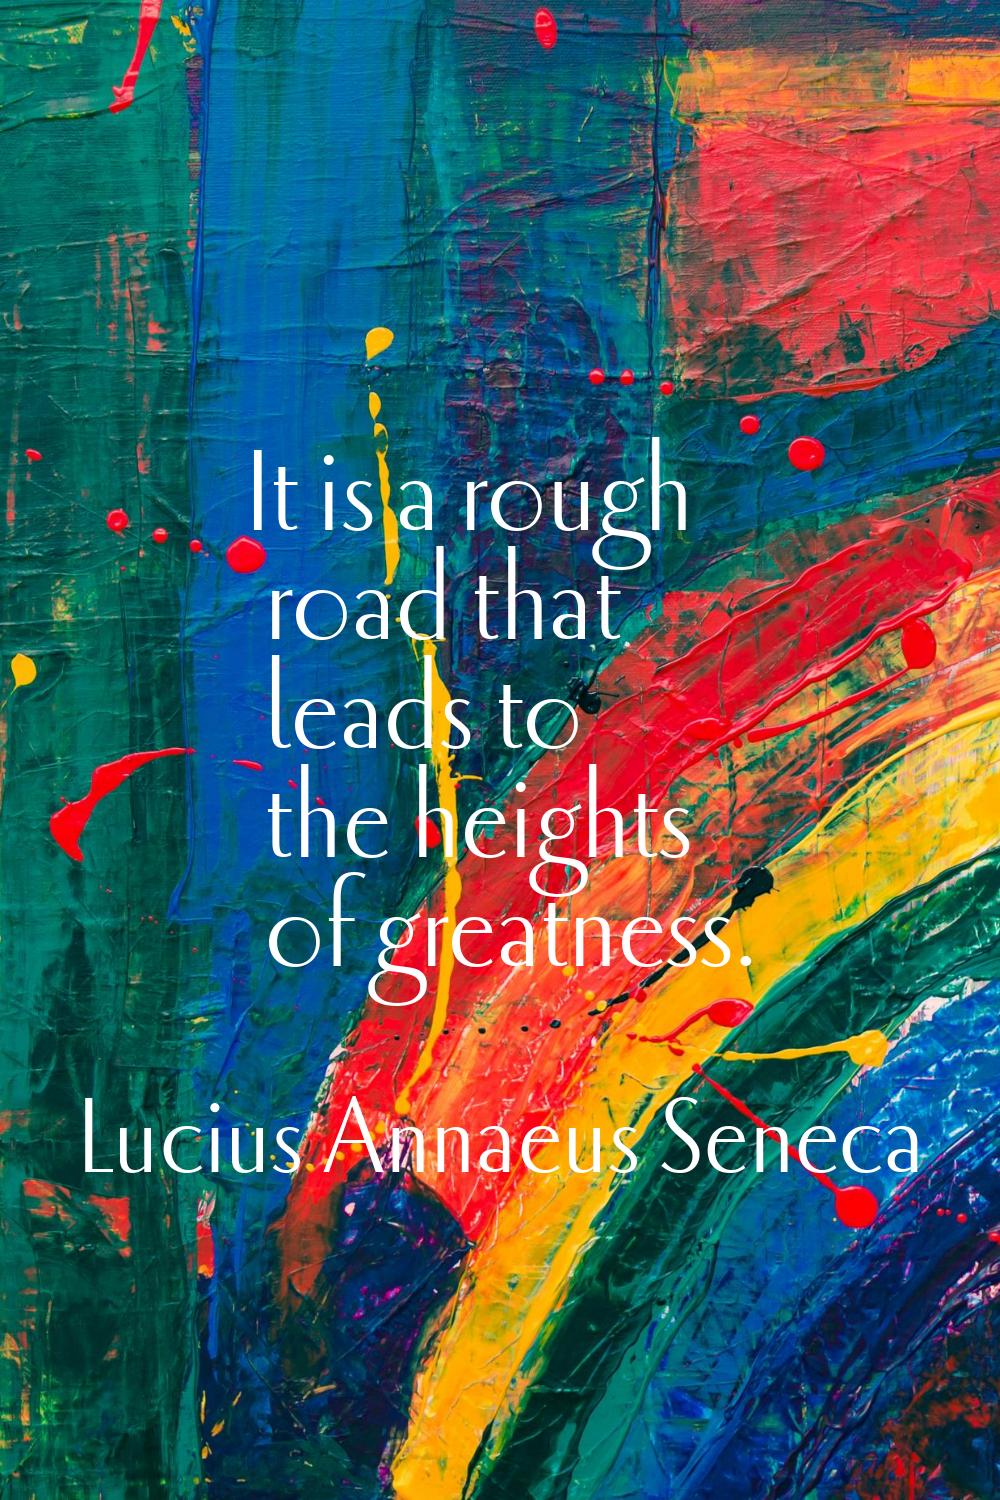 It is a rough road that leads to the heights of greatness.